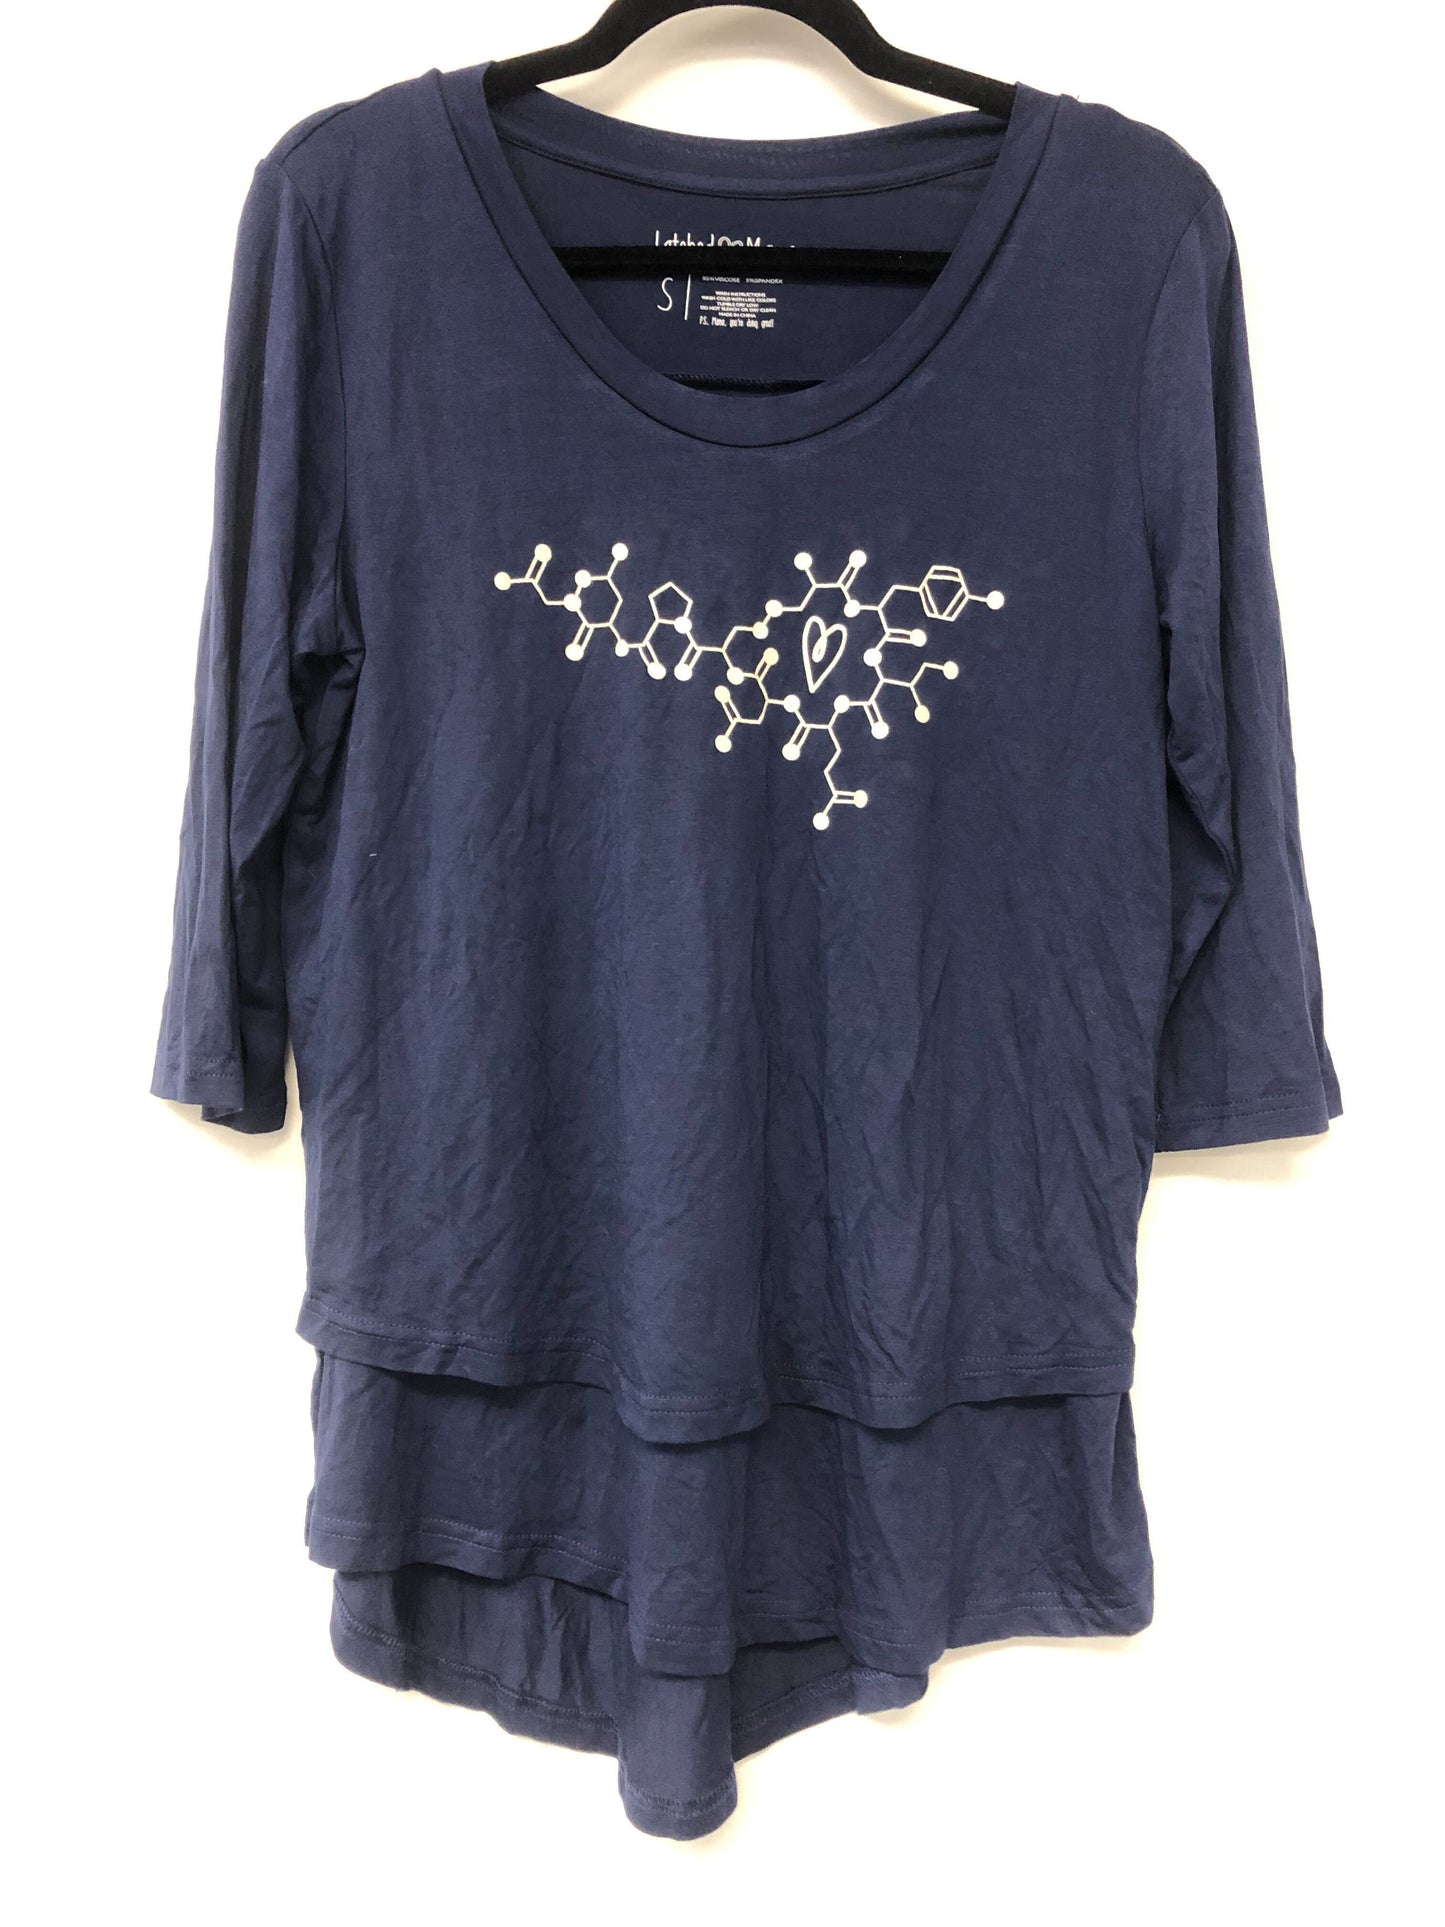 Outlet 6136 - Latched Mama Oxytocin Scoop Neck Nursing Top - Navy - Small